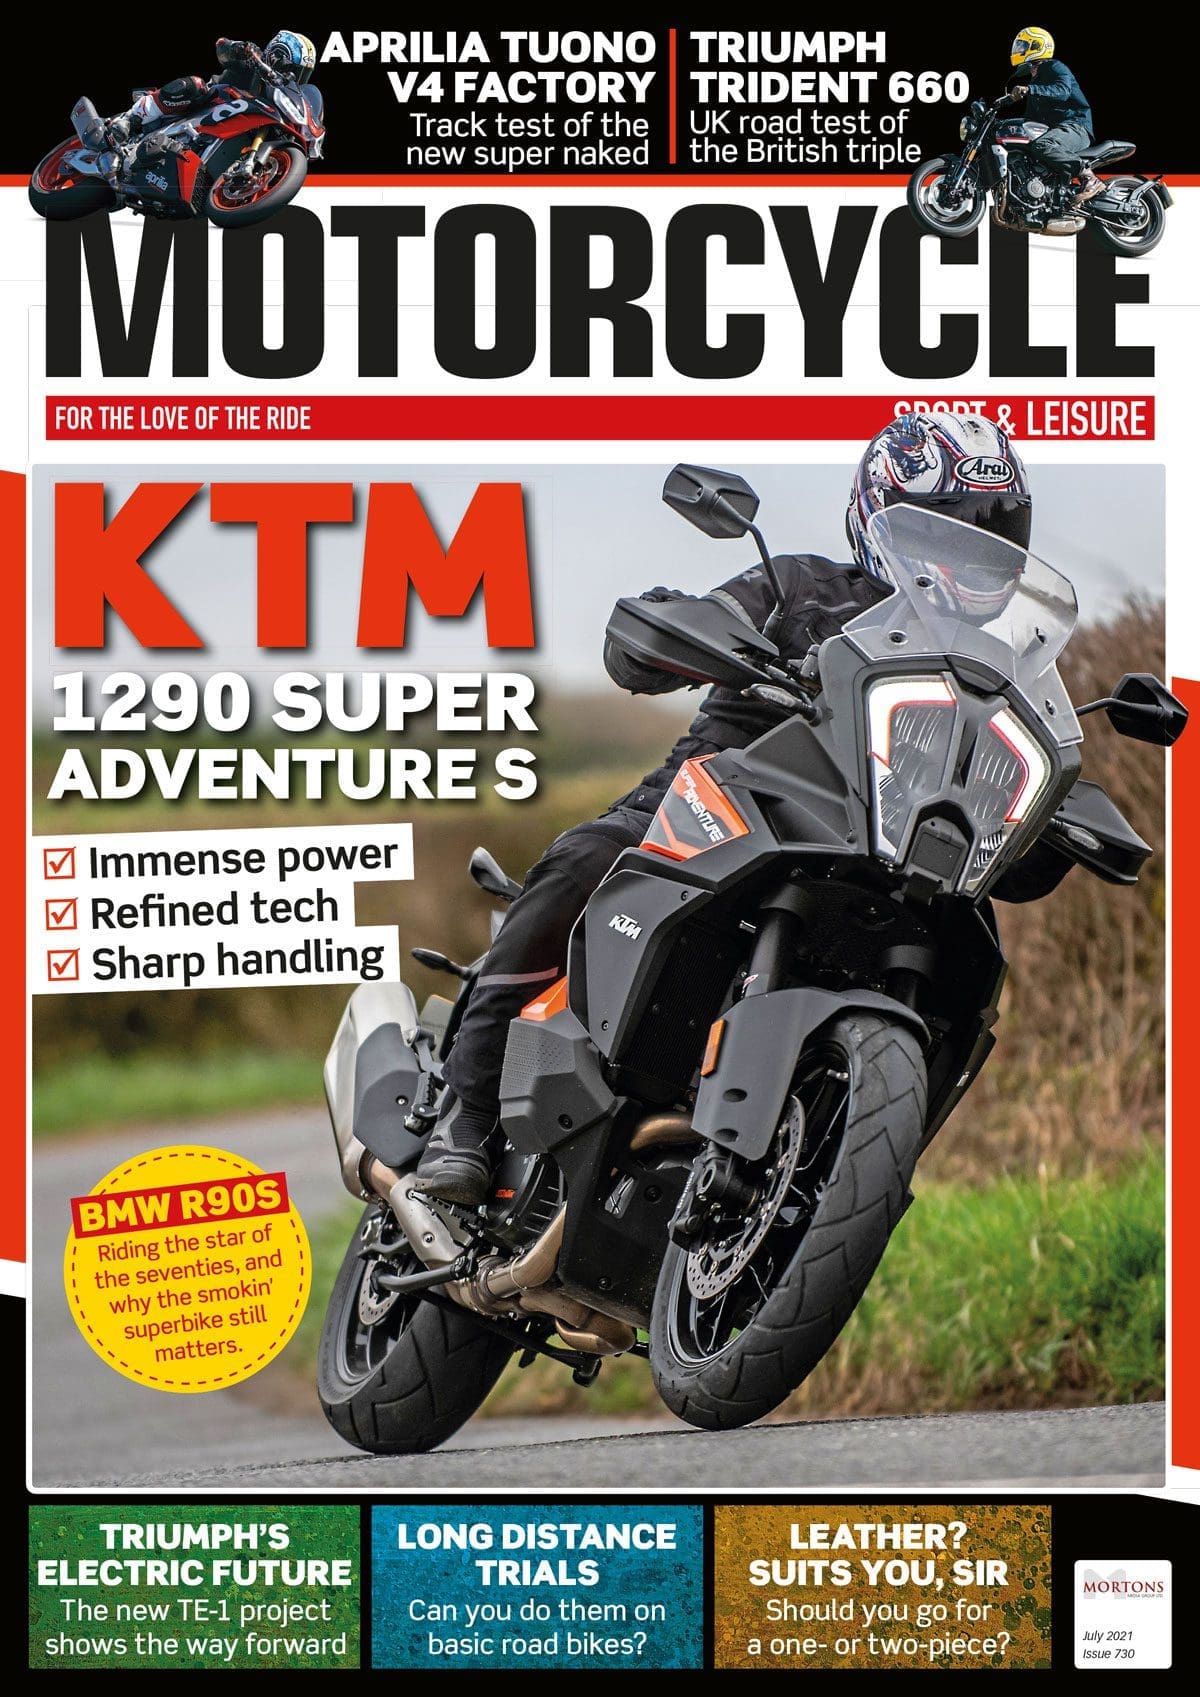 PREVIEW: July issue of Motorcycle Sport & Leisure